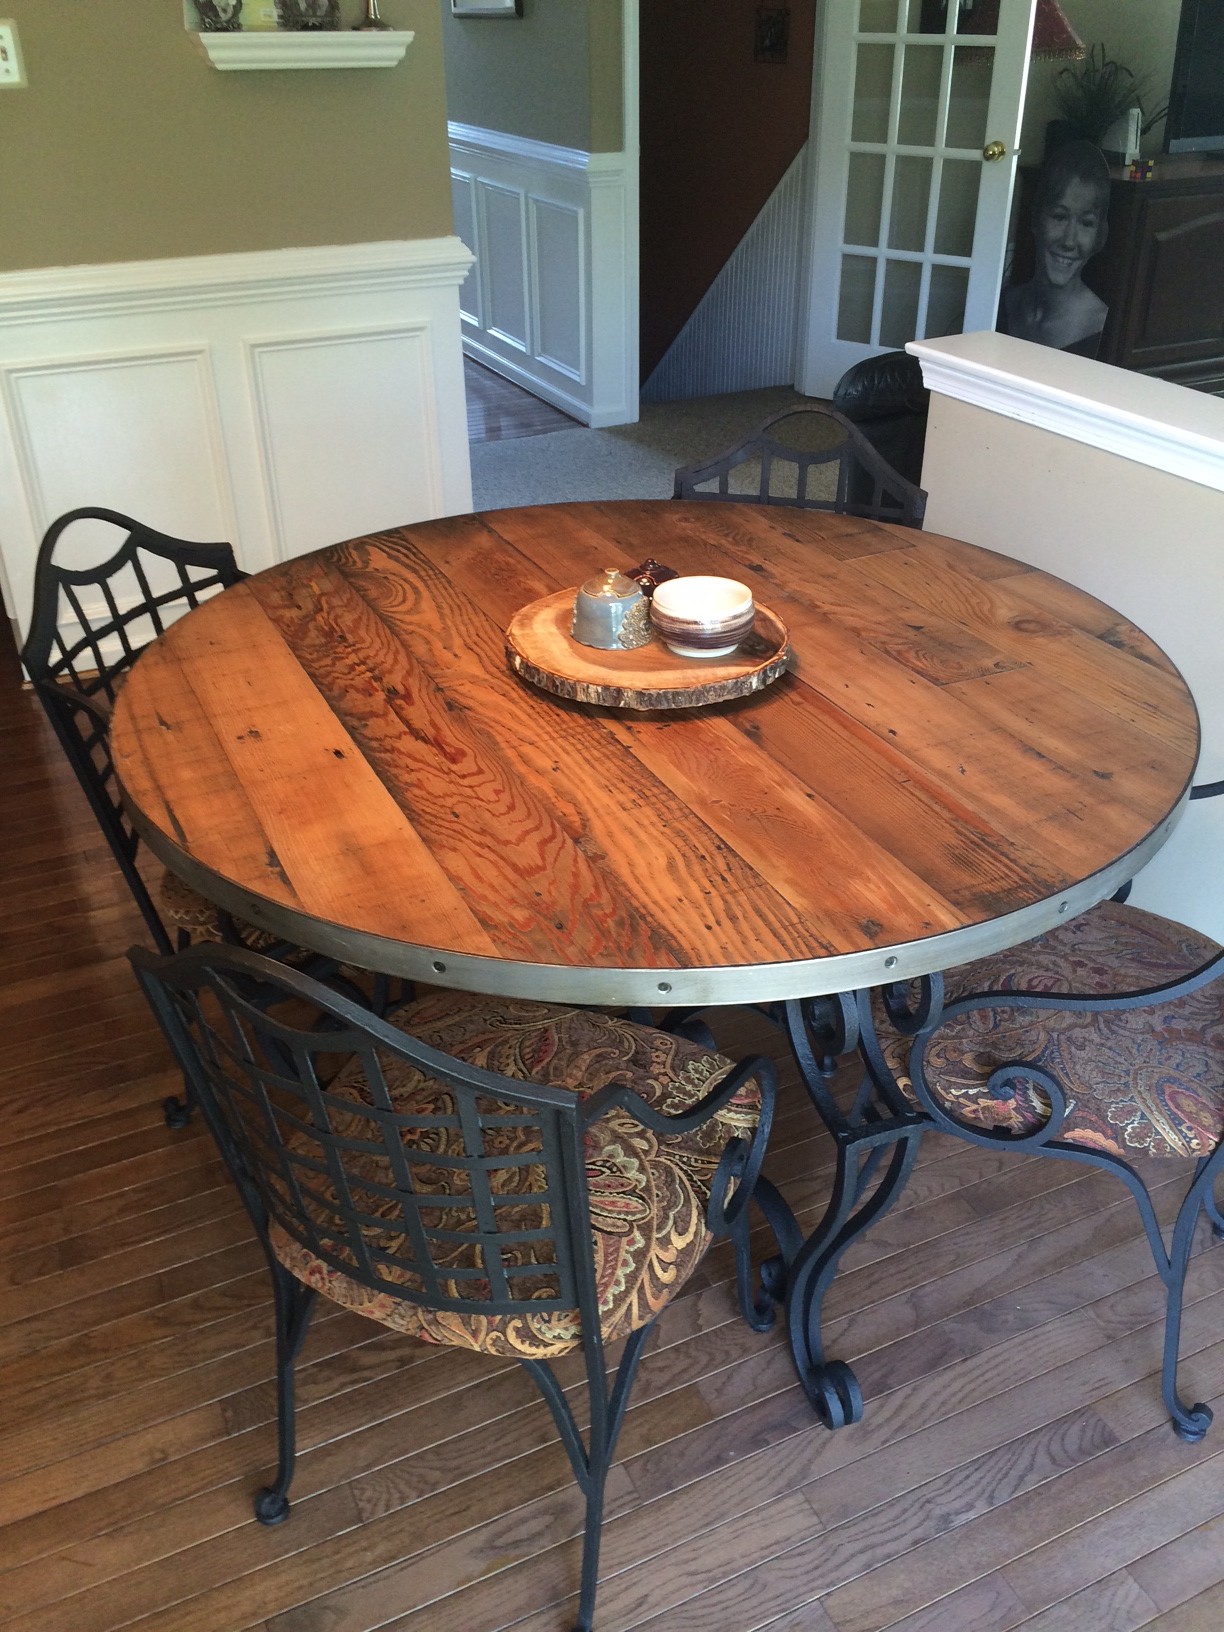 Reclaimed Round Wood Table Tops, 30 Round Reclaimed Wood Table Top